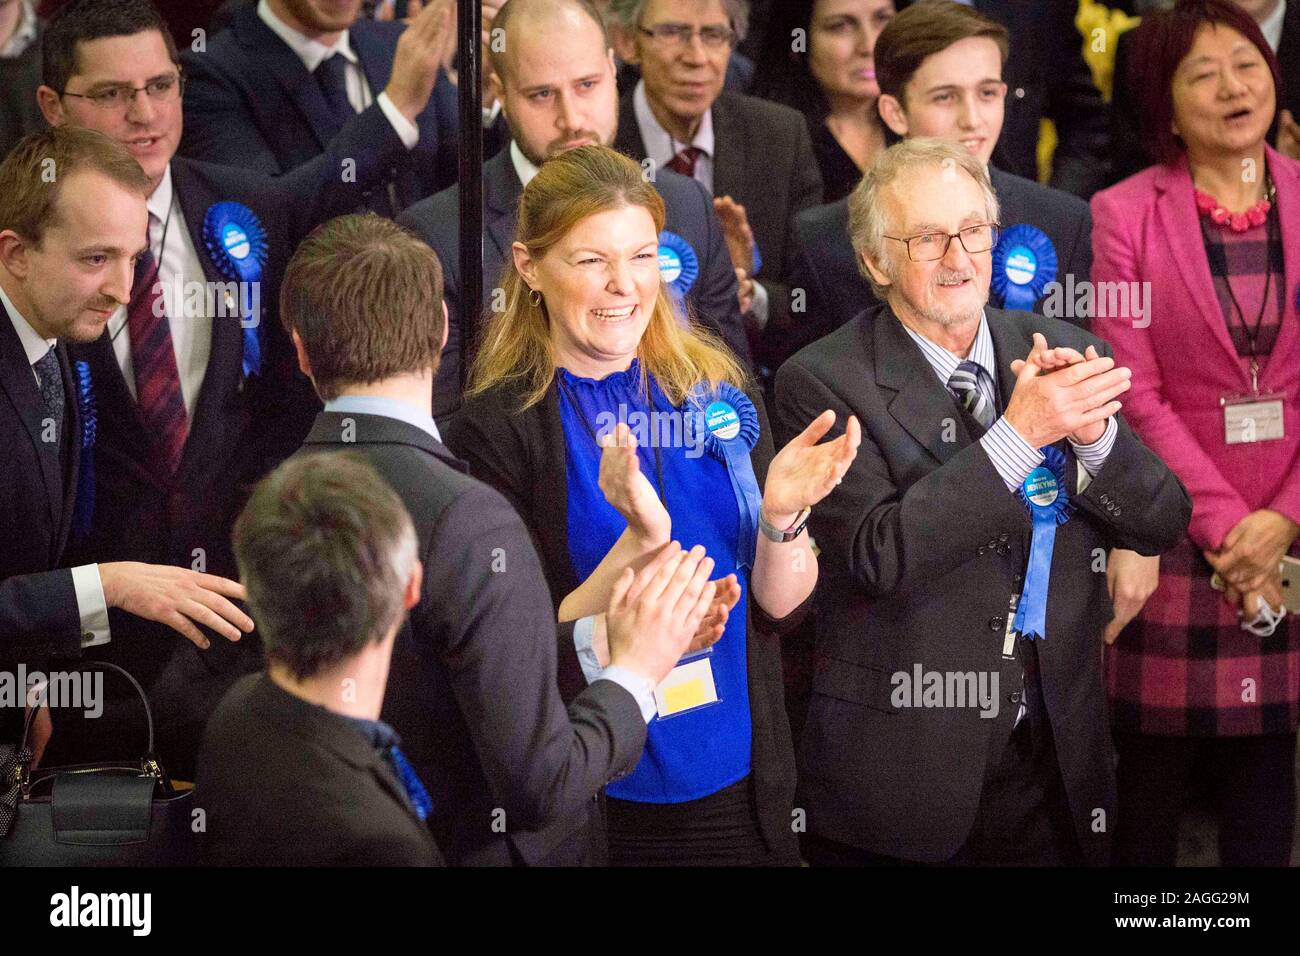 Picture by Chris Bull   13/12/19 General Election 2019 count and results at Leeds Arena.   www.chrisbullphotographer.com Stock Photo